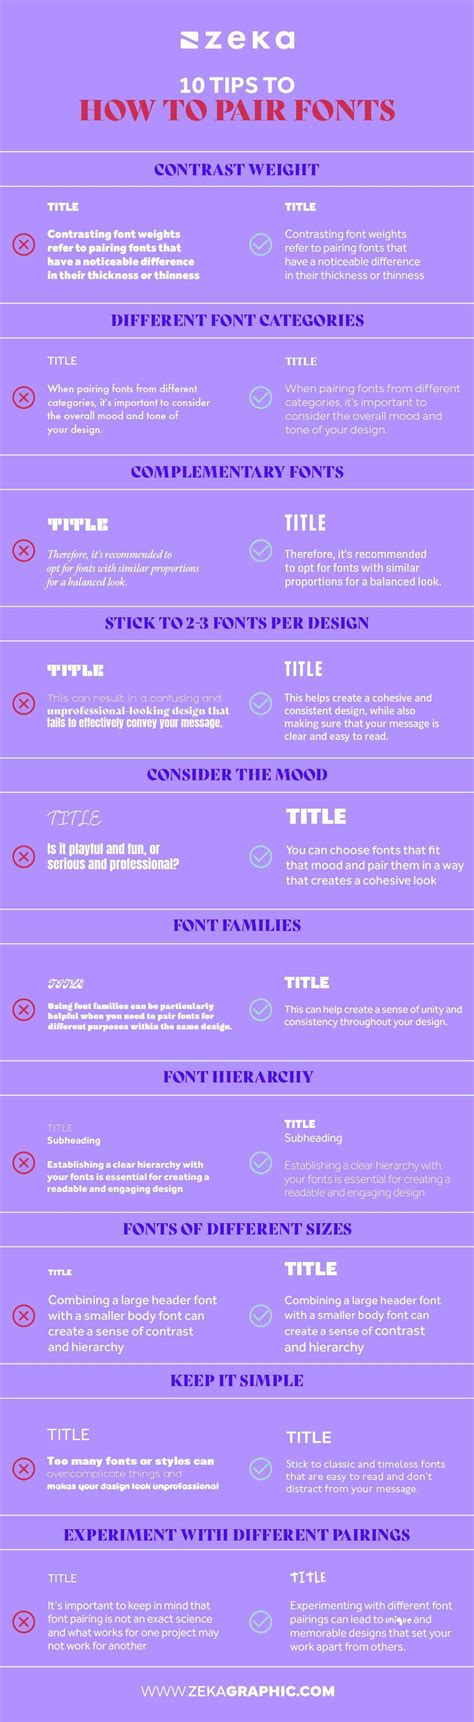 Want to take your font pairing skills to the next level? Check out my latest infographic ...